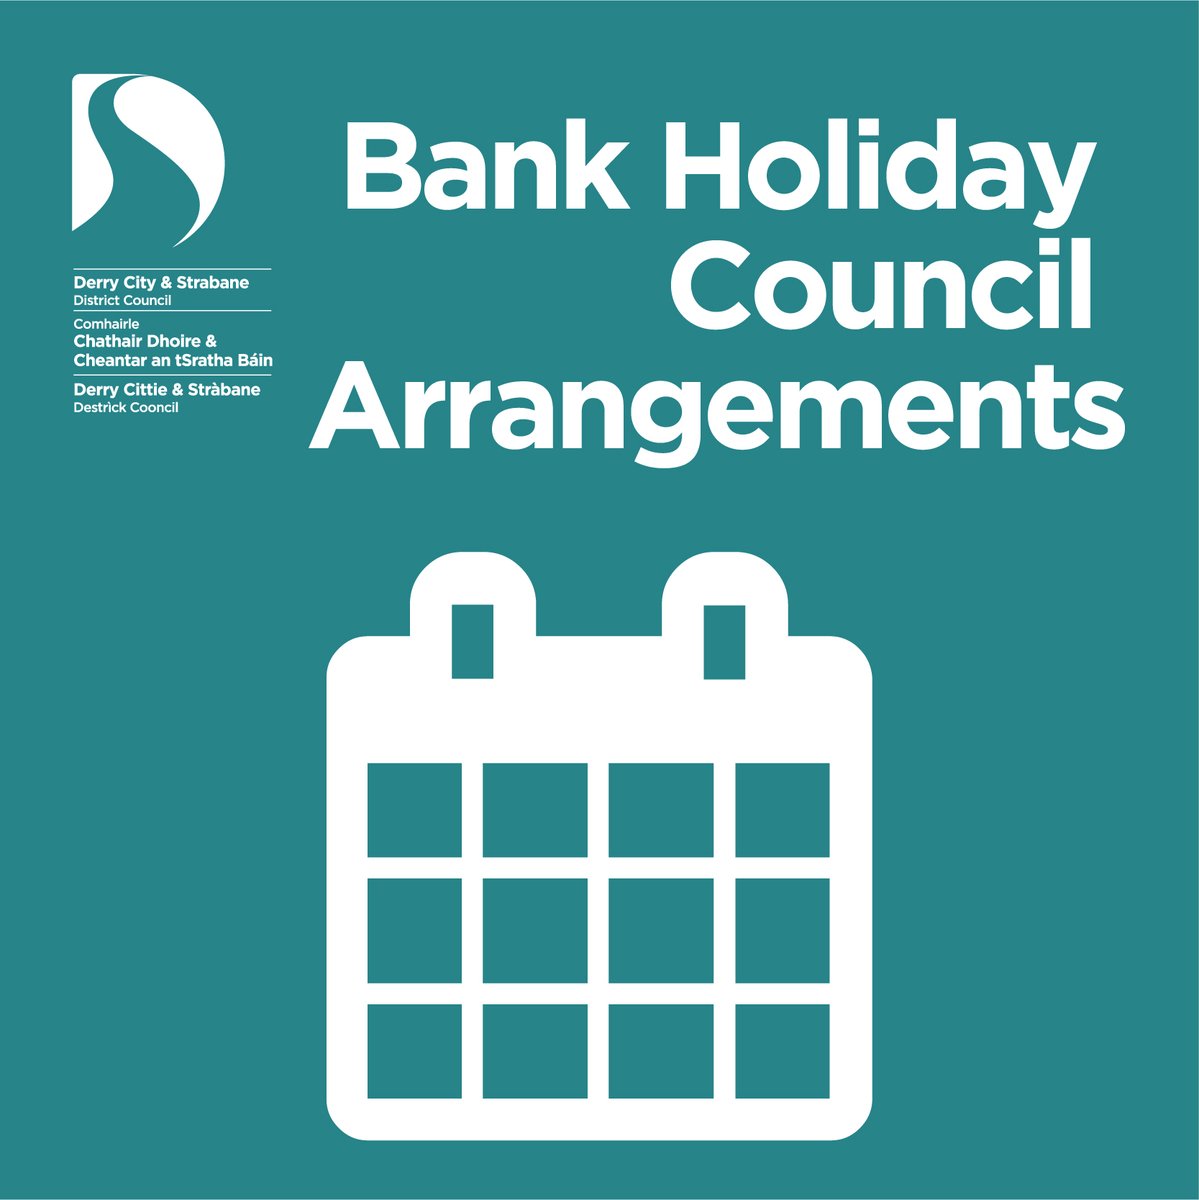 Please note that there will be minimal disruption to Council services over the Bank Holiday weekend. Bin collections and recycling centres across the City and District will operate as normal on Monday May 27th. Council offices will be closed, as well as Registrar’s Offices.